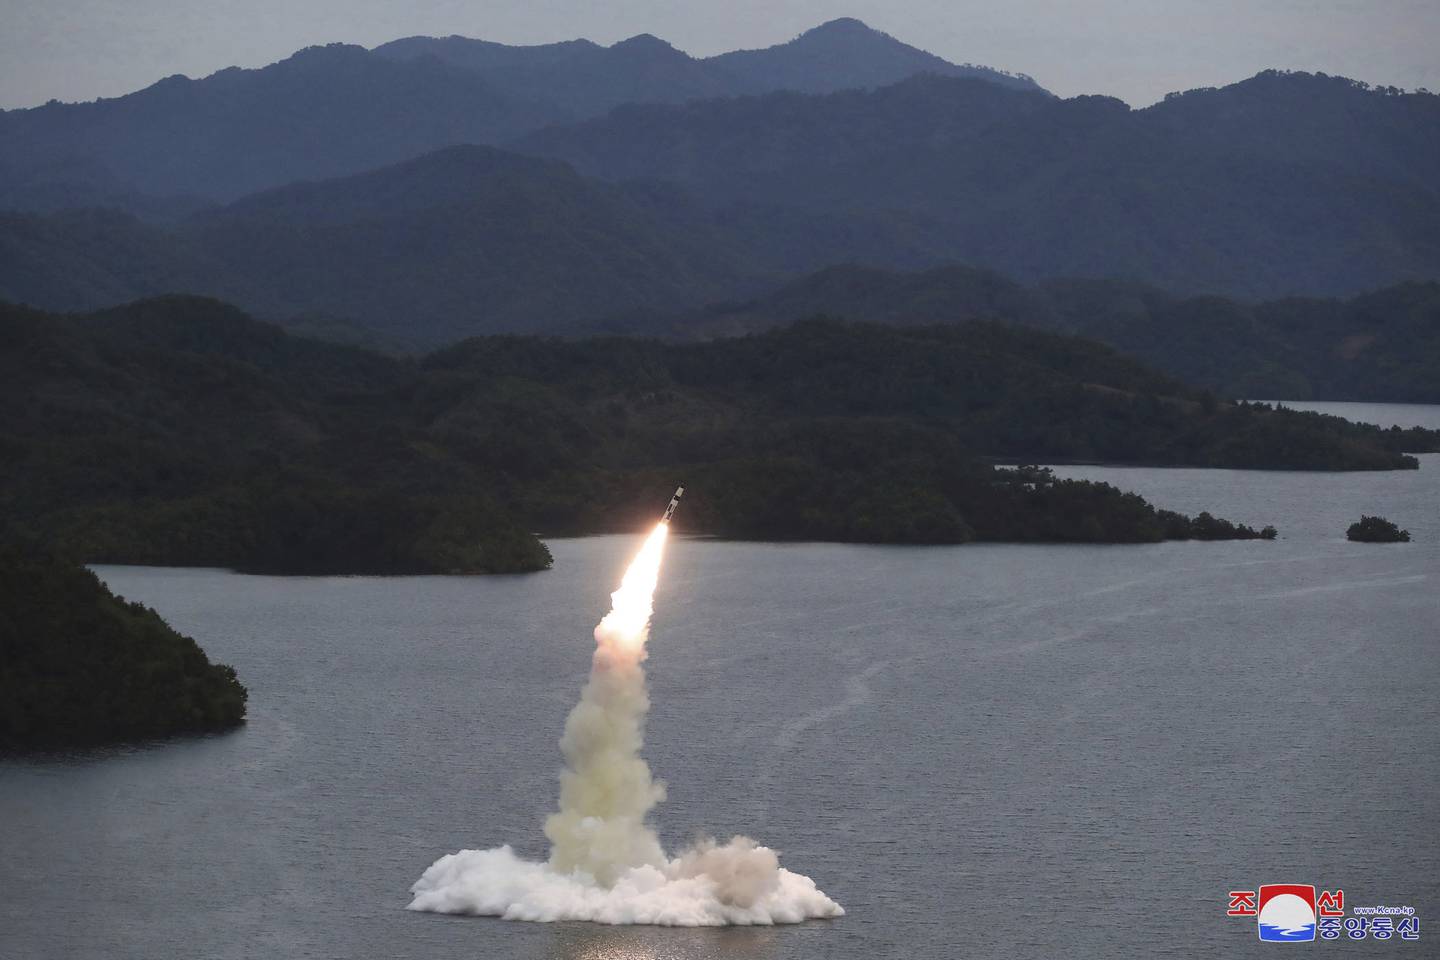 This photo provided on Oct. 10, 2022, by the North Korean government purports to show a missile test at an undisclosed location in North Korea, as taken sometime between Sept. 25 and Oct. 9.